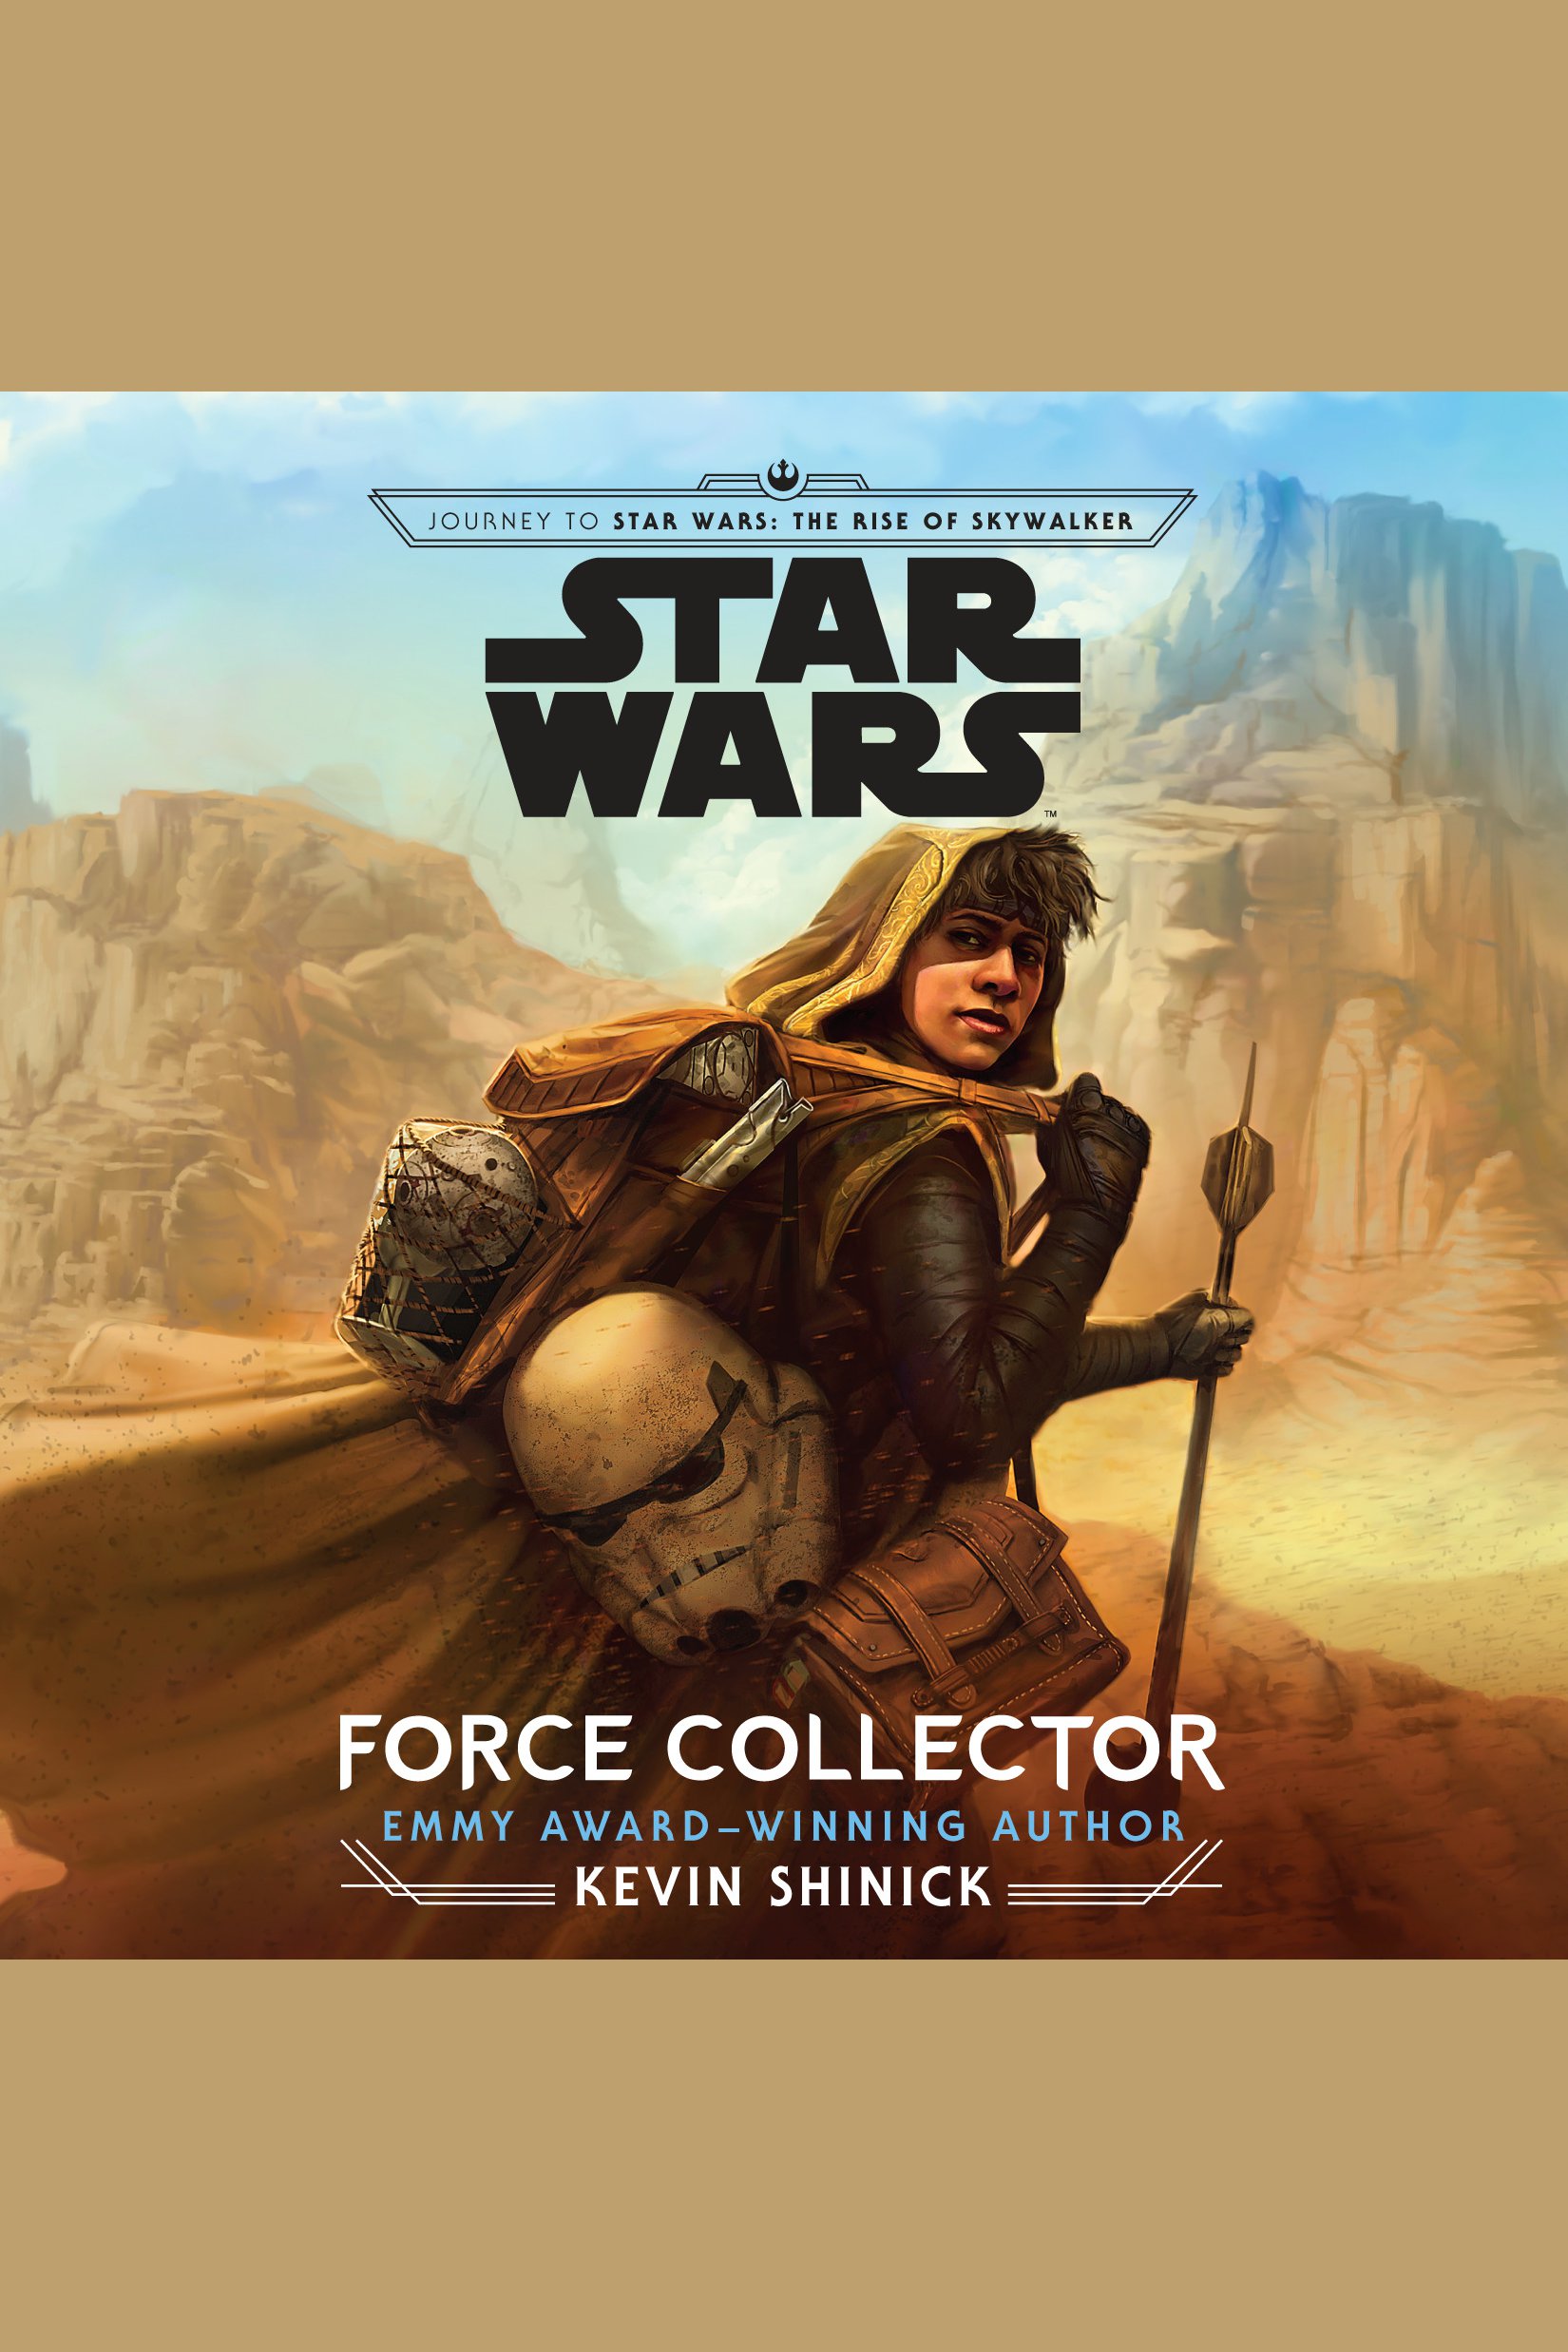 Journey to Star Wars: The Rise of Skywalker Force Collector cover image